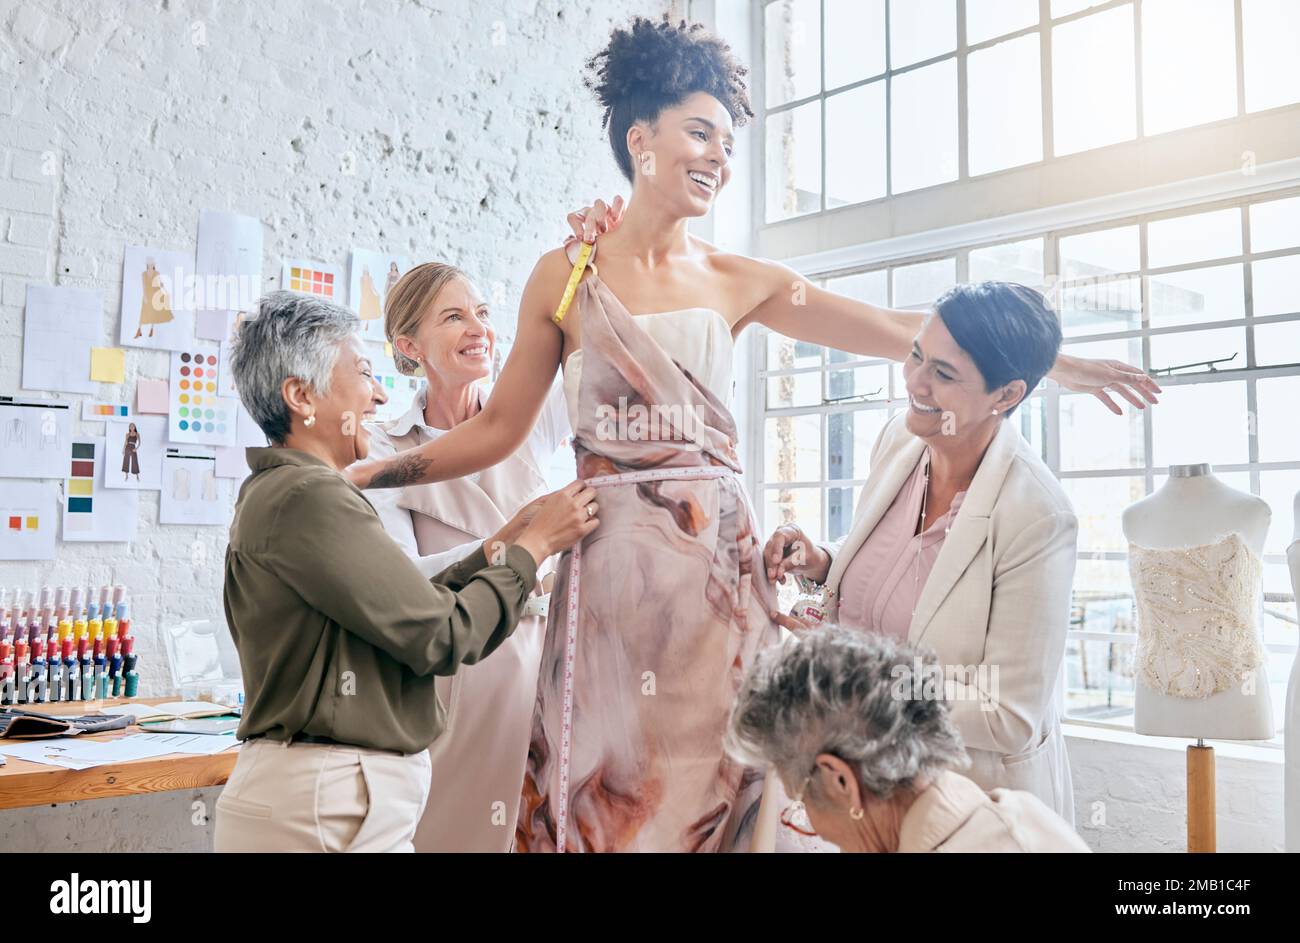 Model, designer women and dress fitting with help, design or teamwork for runway vision in workshop. Happy creative team, woman collaboration and Stock Photo